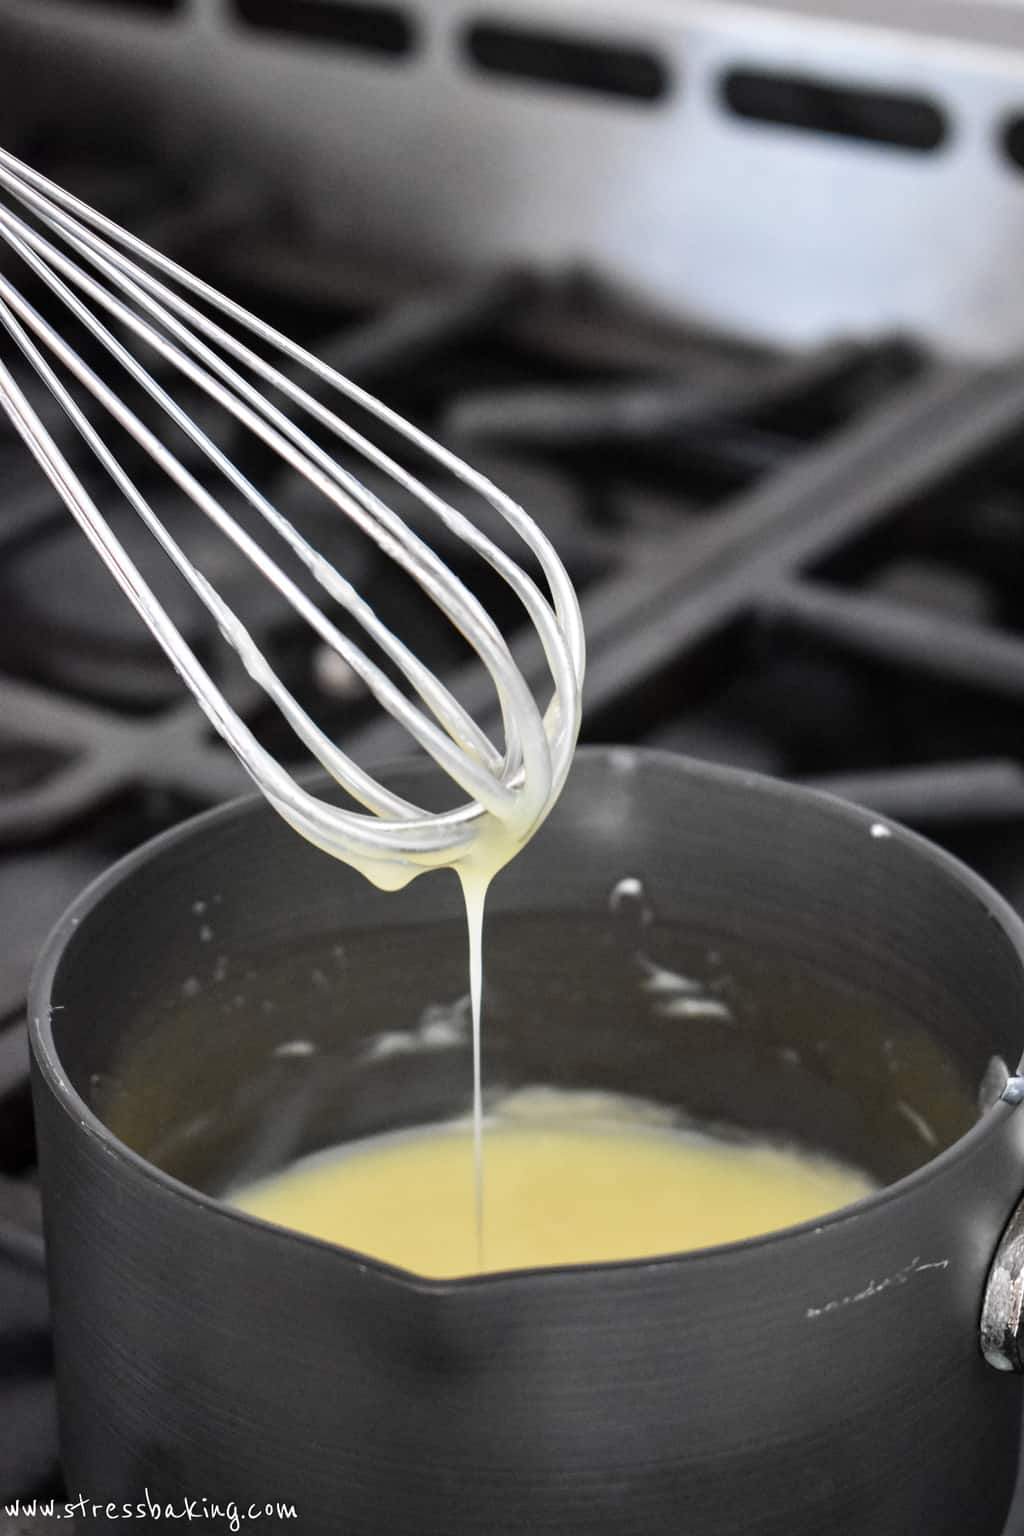 A whisk lifting white chocolate sauce out of a small saucepan